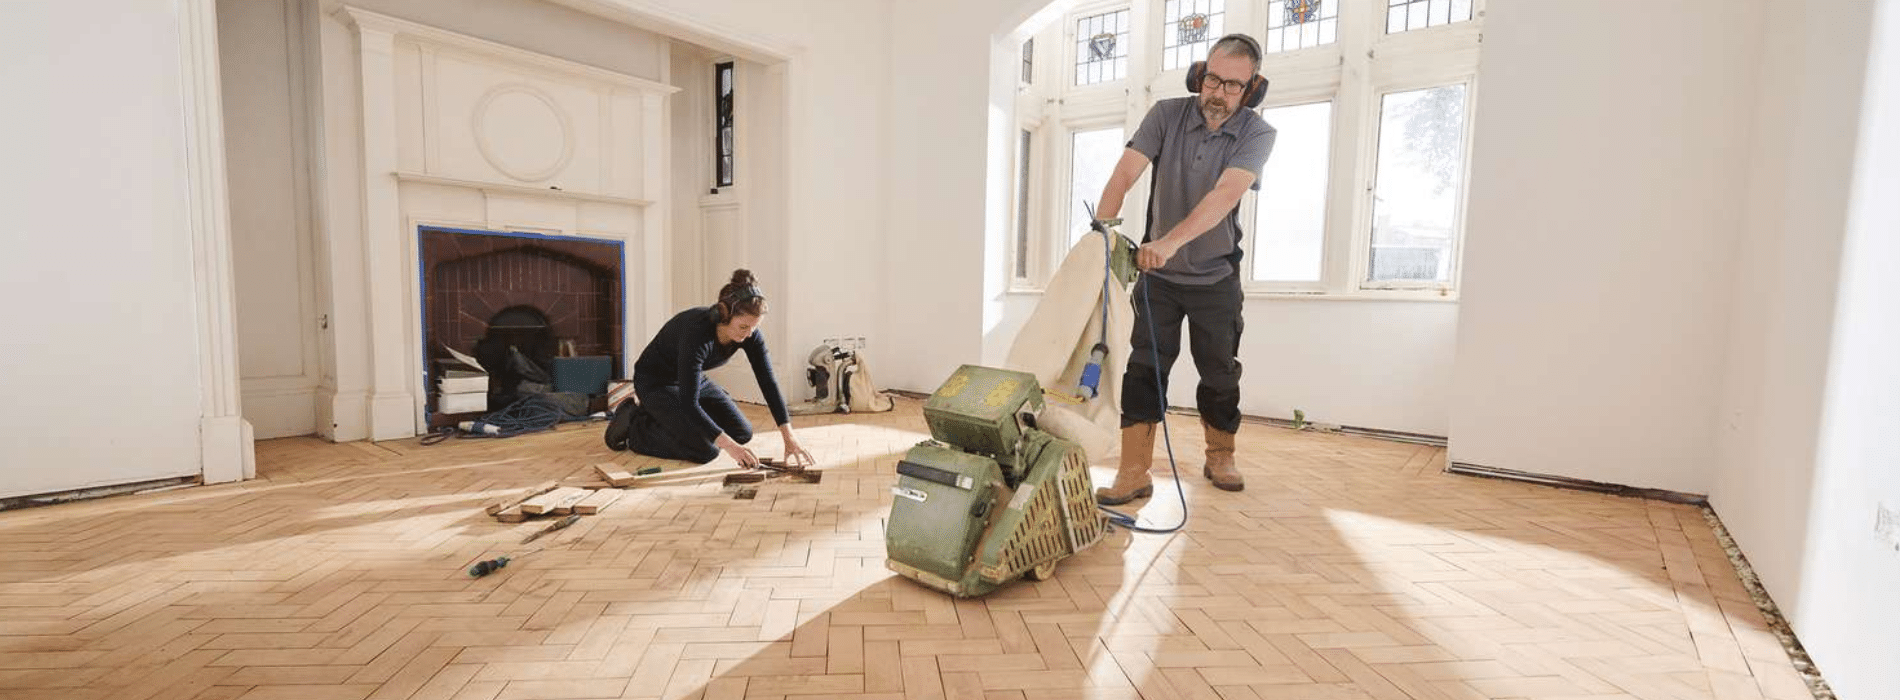 Professional team from Mr Sander® in Hendon, NW4, using a 1900-effect Bona belt sander with a dimension of 407mm, voltage 230, frequency 5060, to meticulously restore a herringbone floor while ensuring a dust-free environment with a HEPA filtration system.